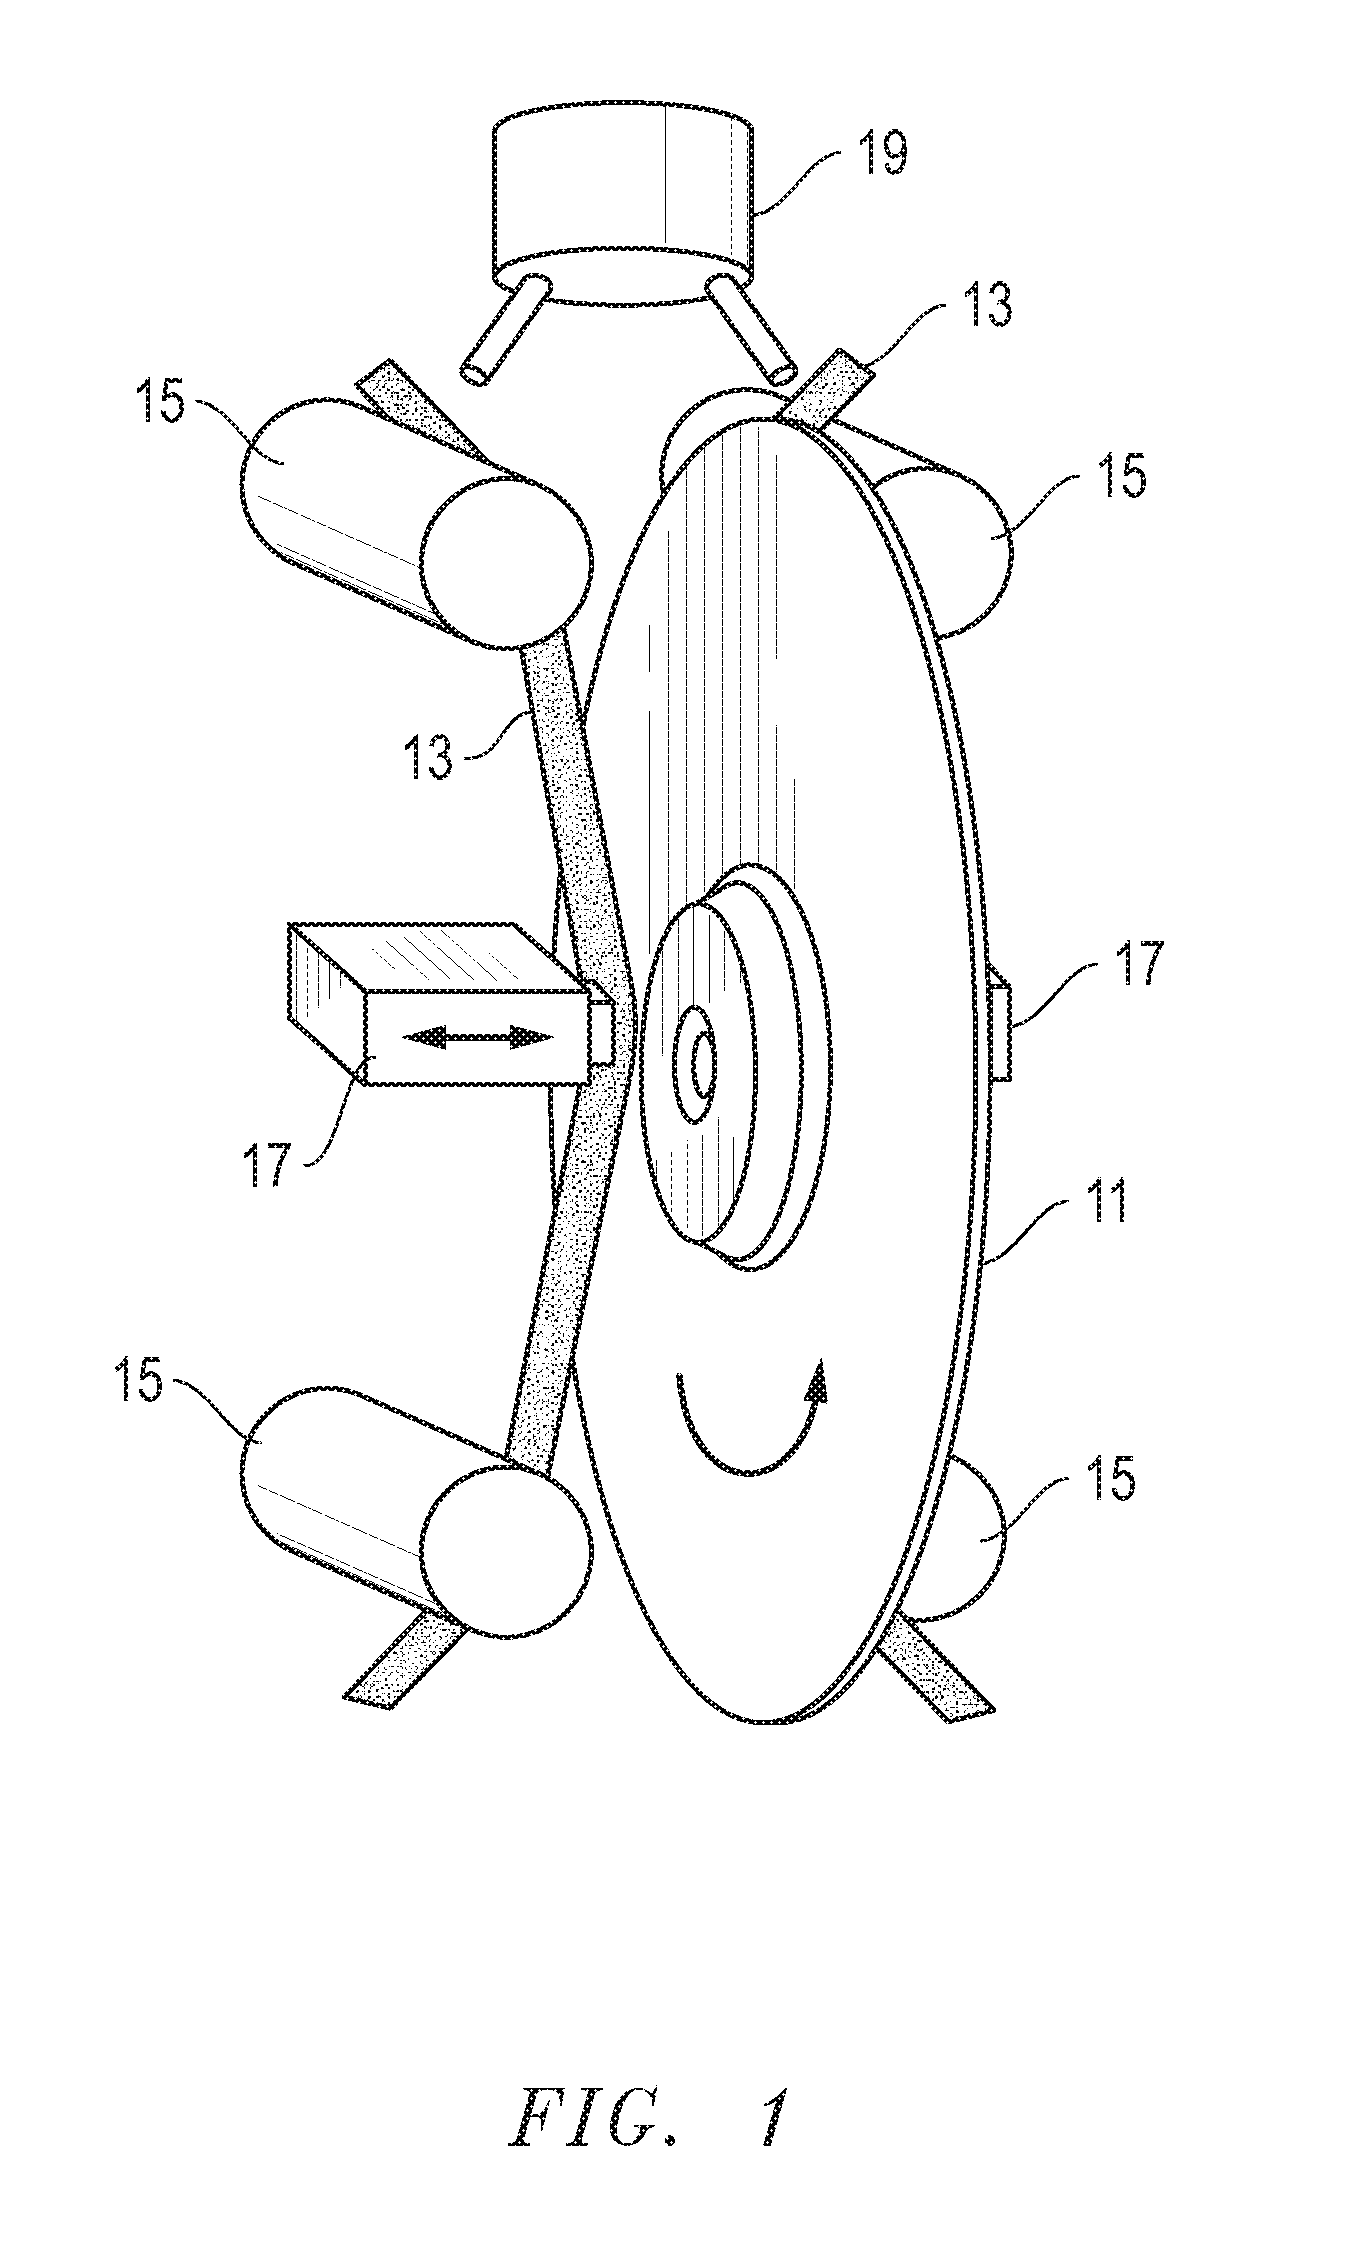 Method for lubed tape burnish for producing thin lube media